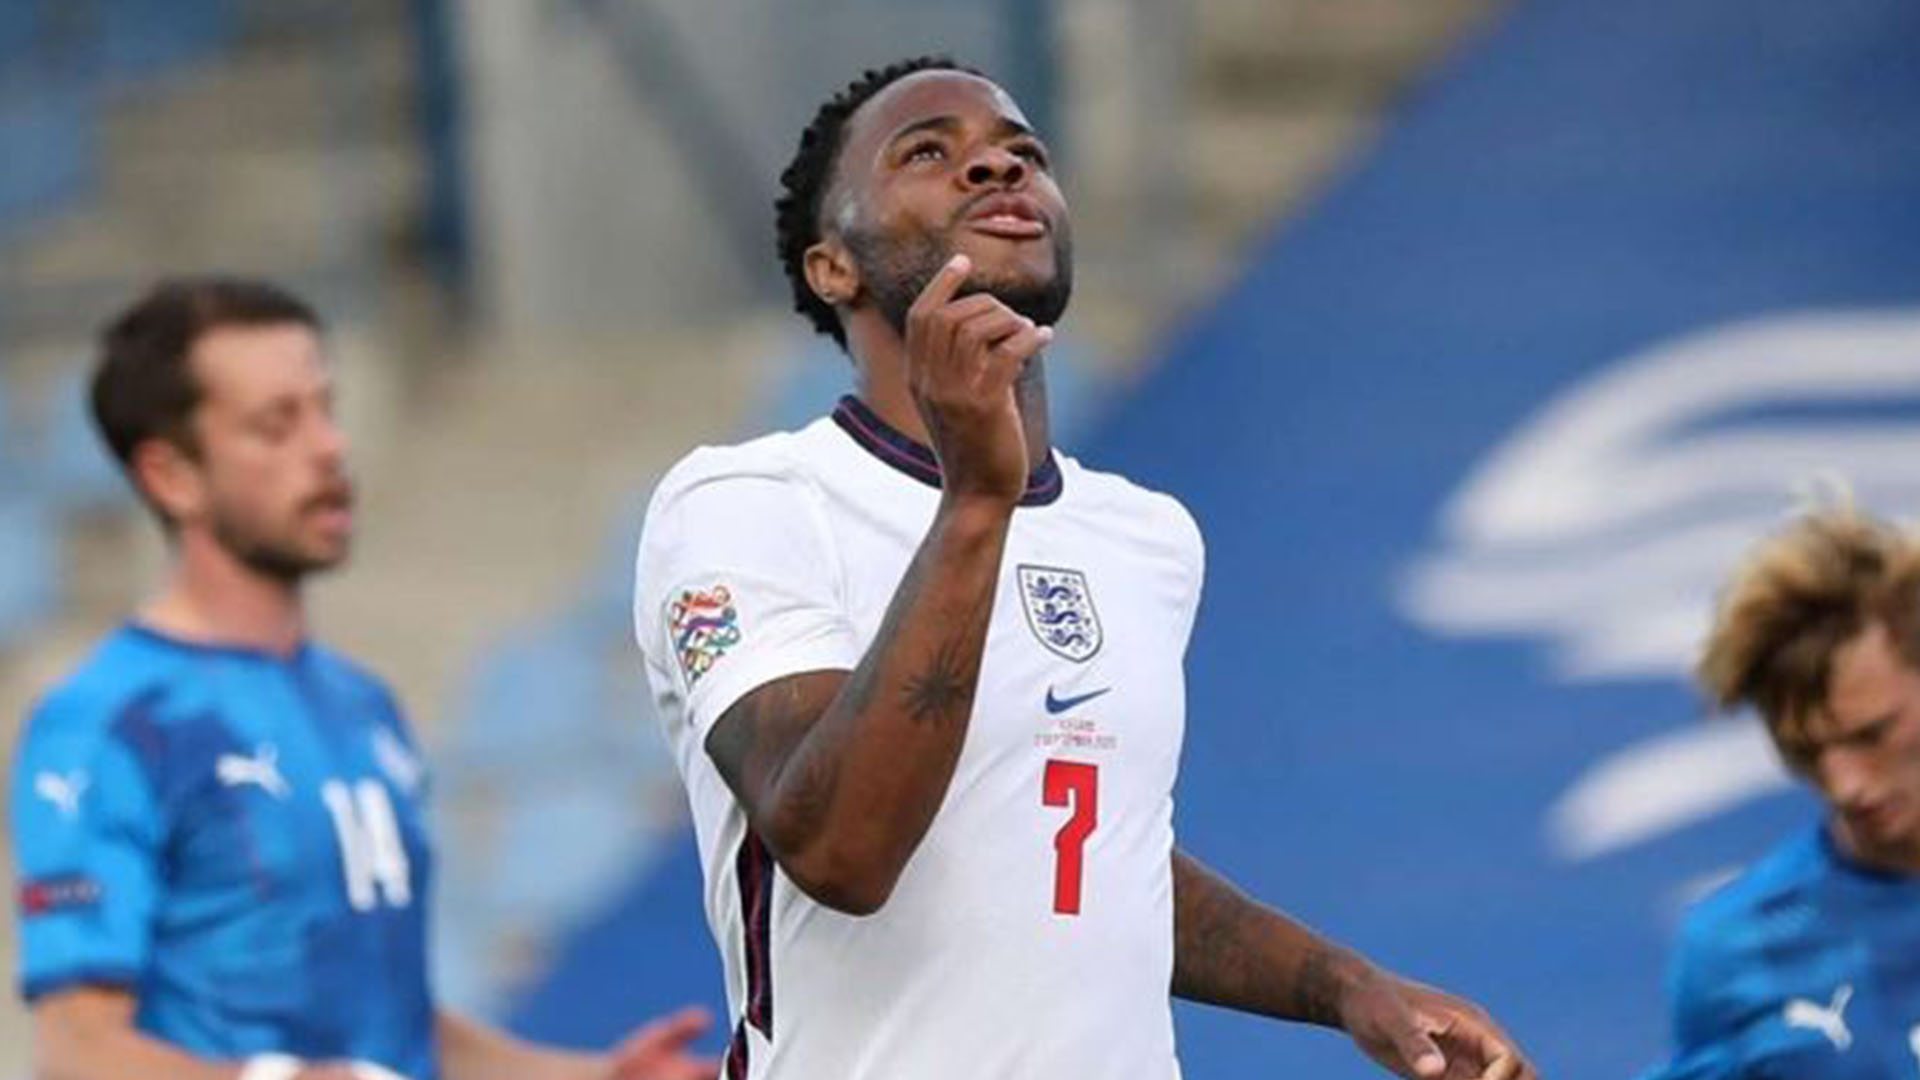 England win after a successful last minute penalty against Ireland : UEFA Nations league